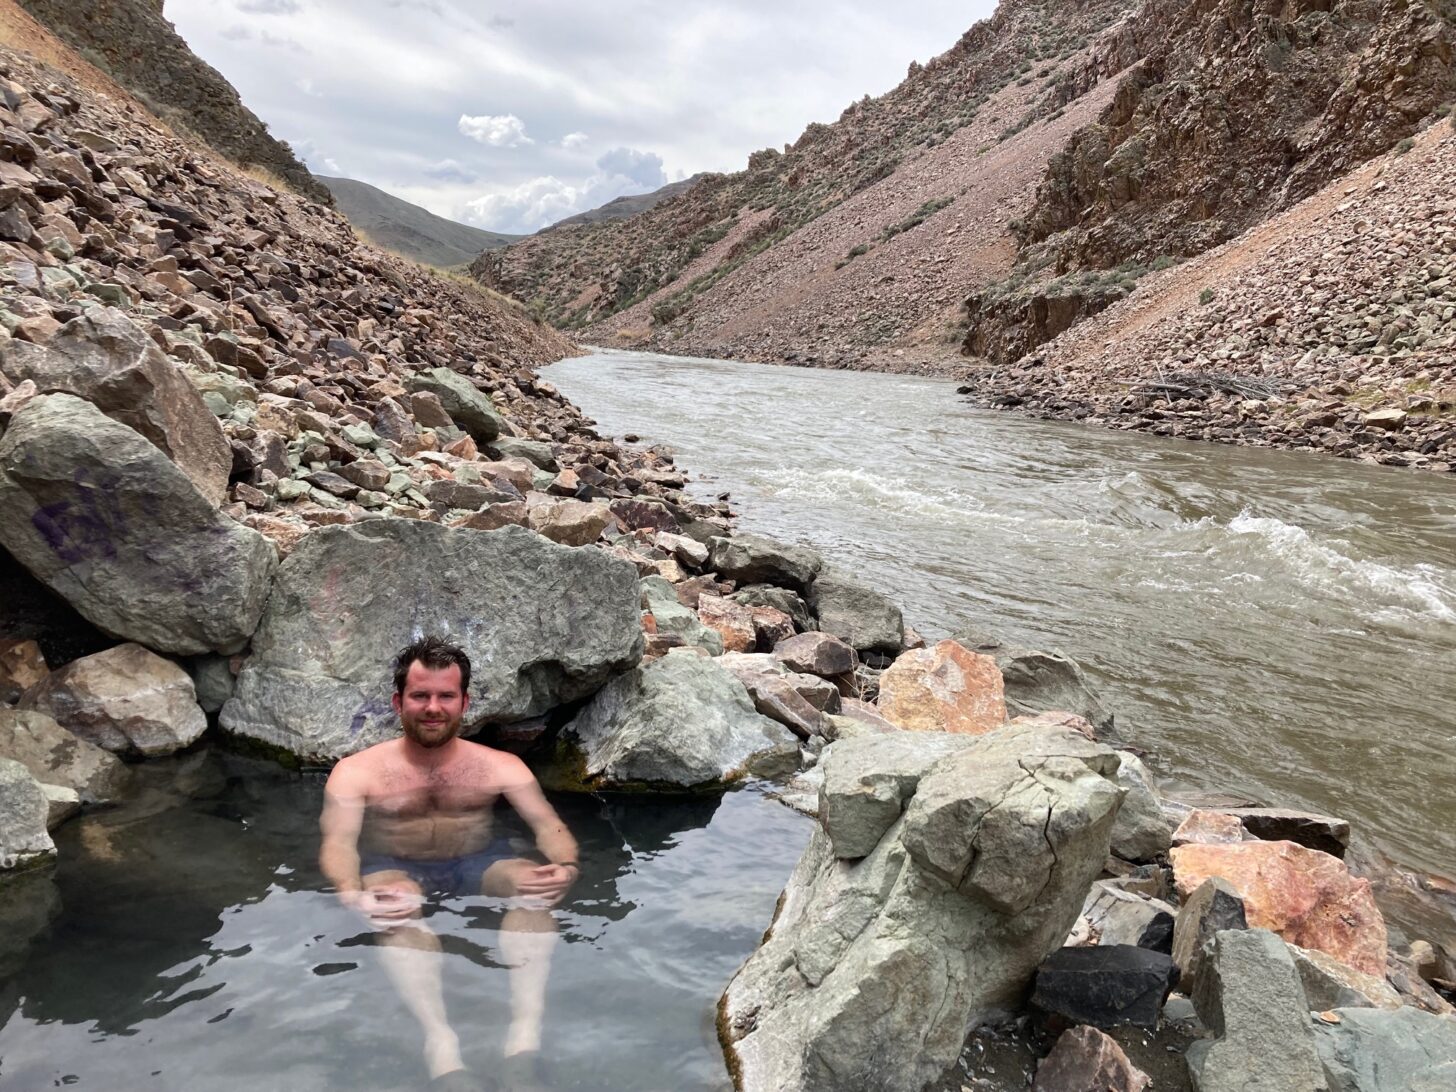 A man sits in a hot spring next to a river.